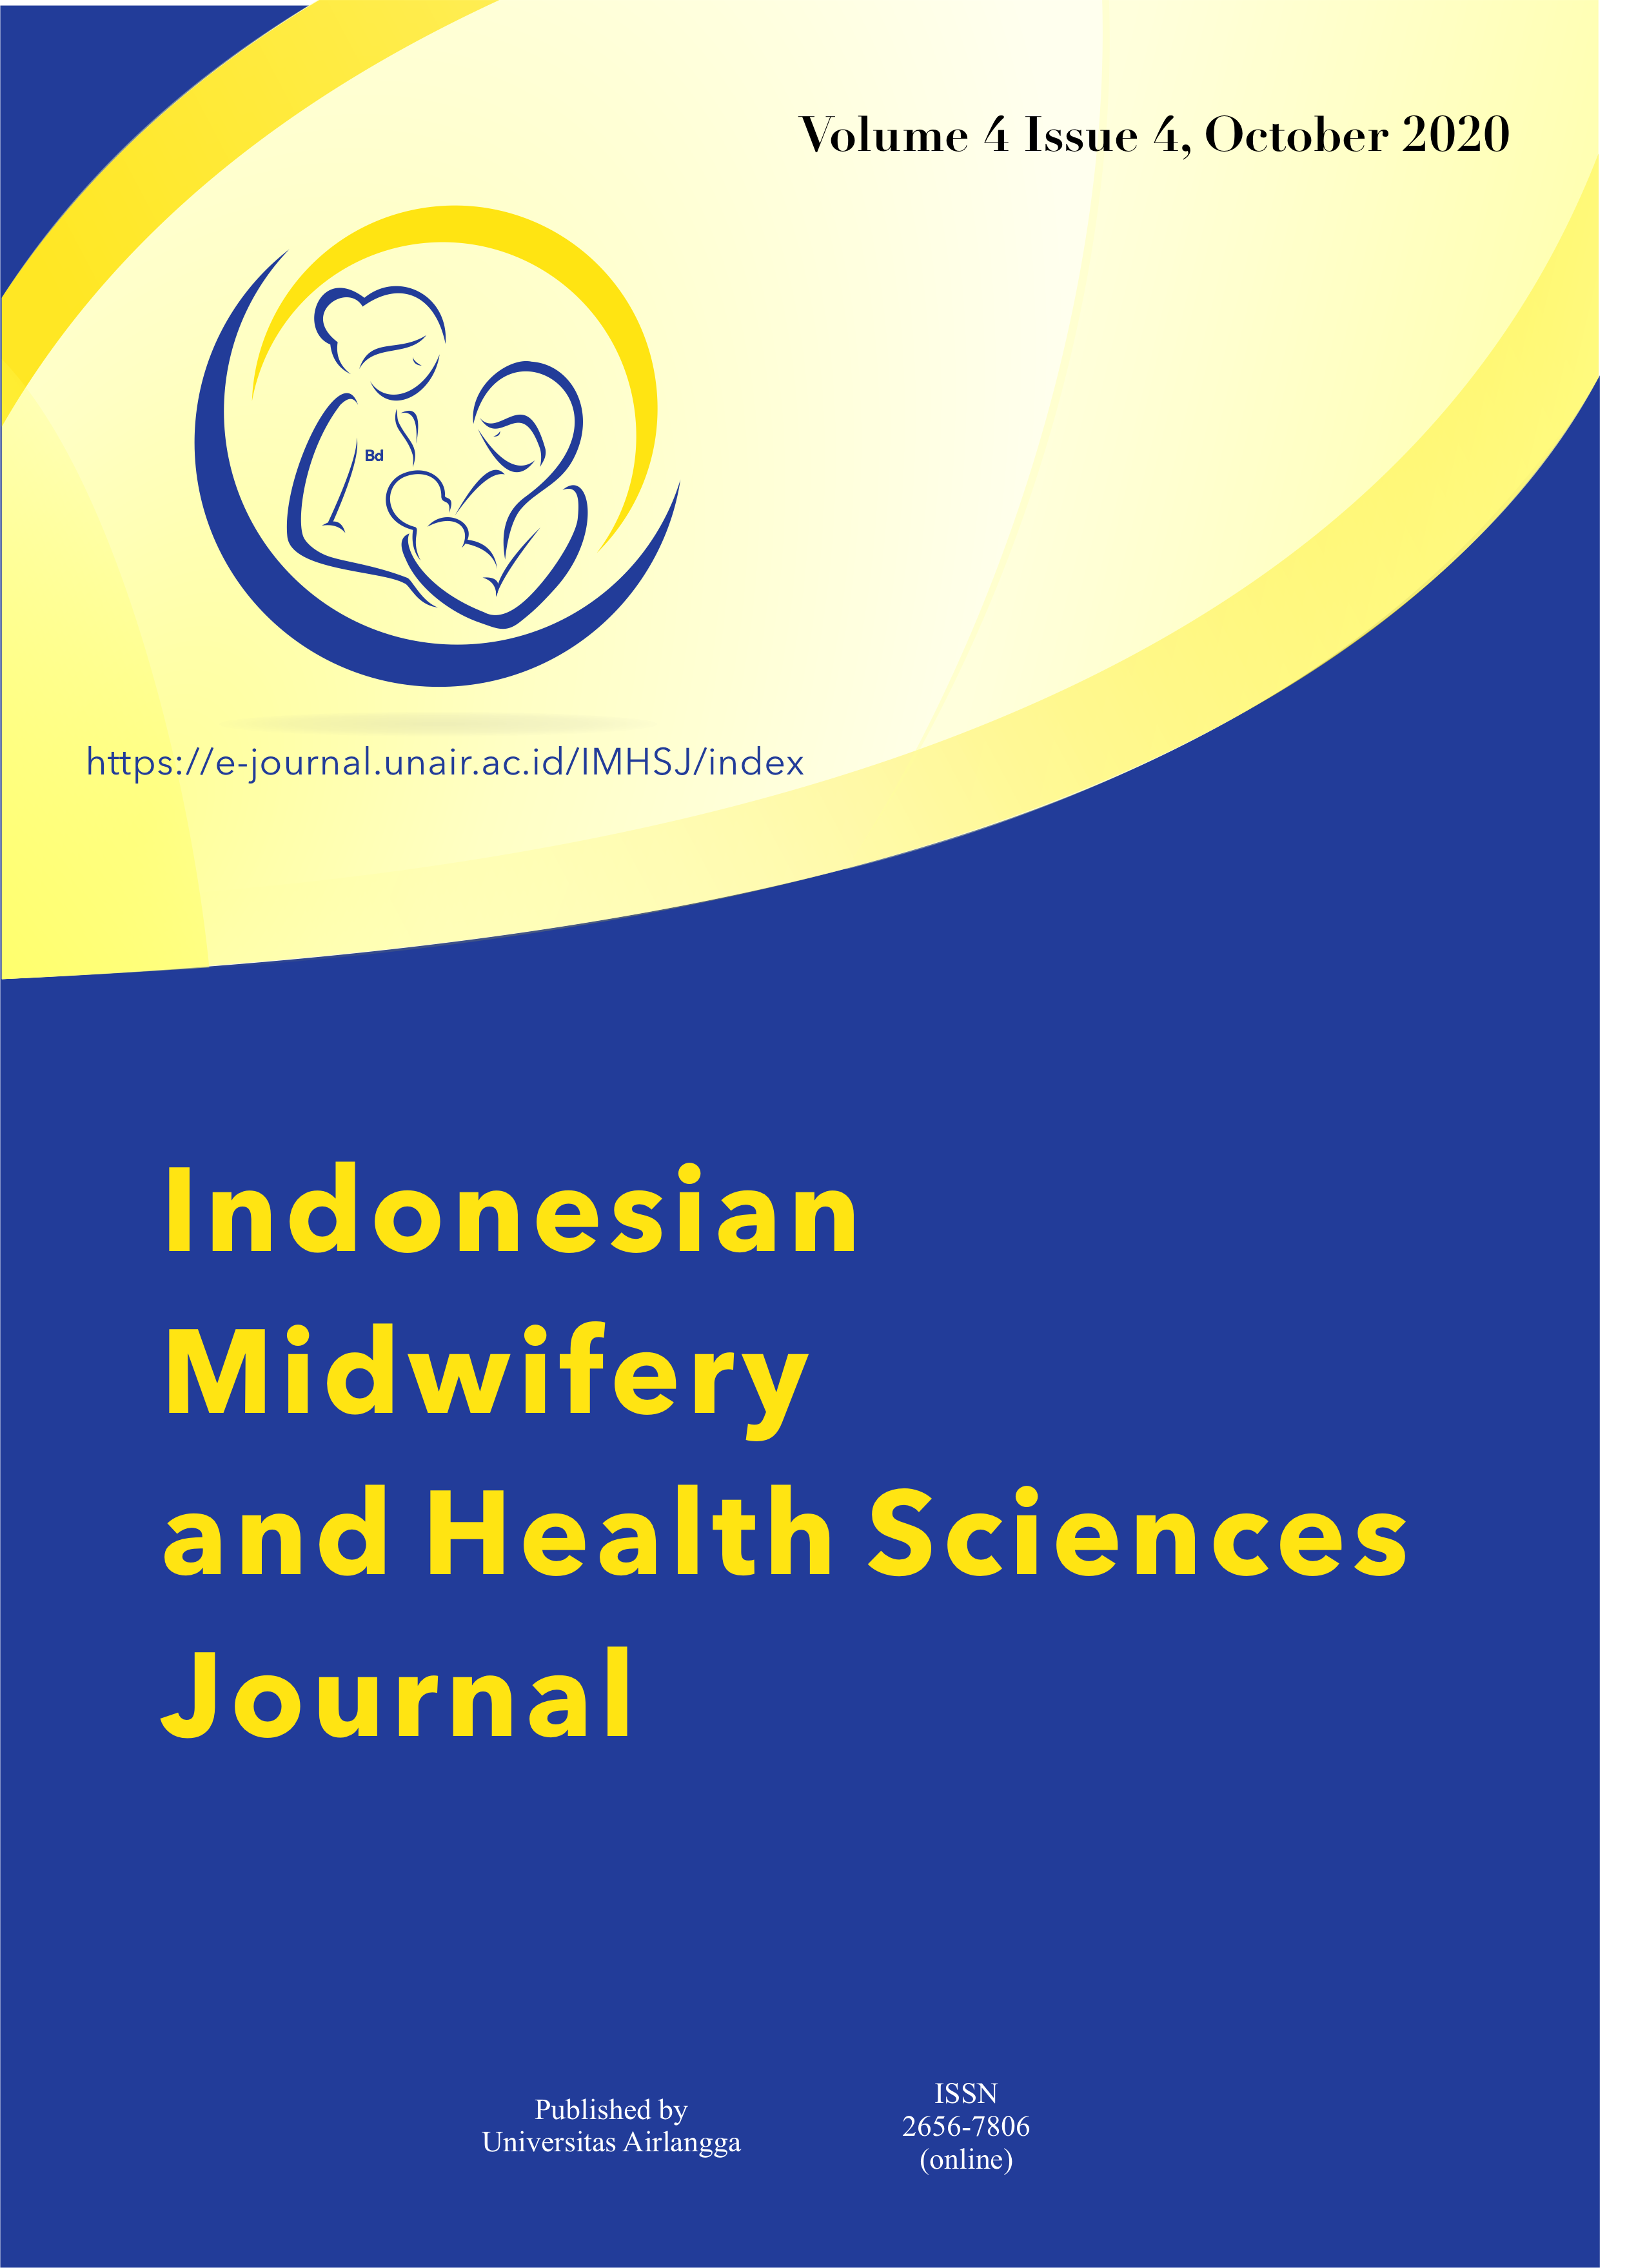 						View Vol. 4 No. 4 (2020): Indonesian Midwifery and Health Sciences Journal, October 2020
					